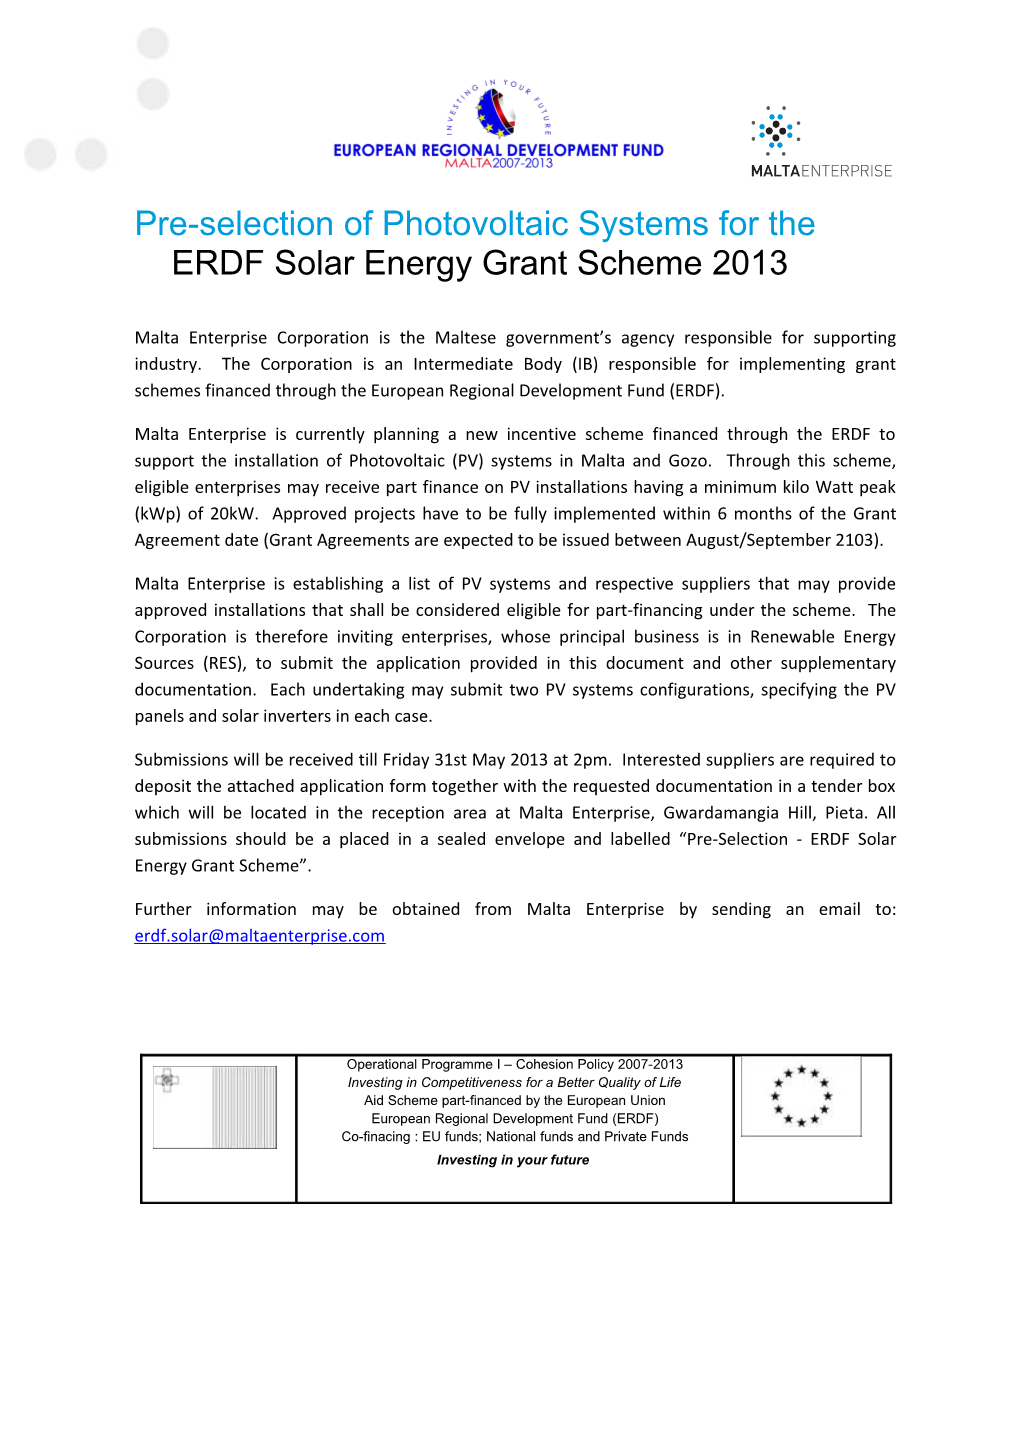 Pre-Selection of Photovoltaic Systems for the ERDF Solar Energy Grant Scheme 2013